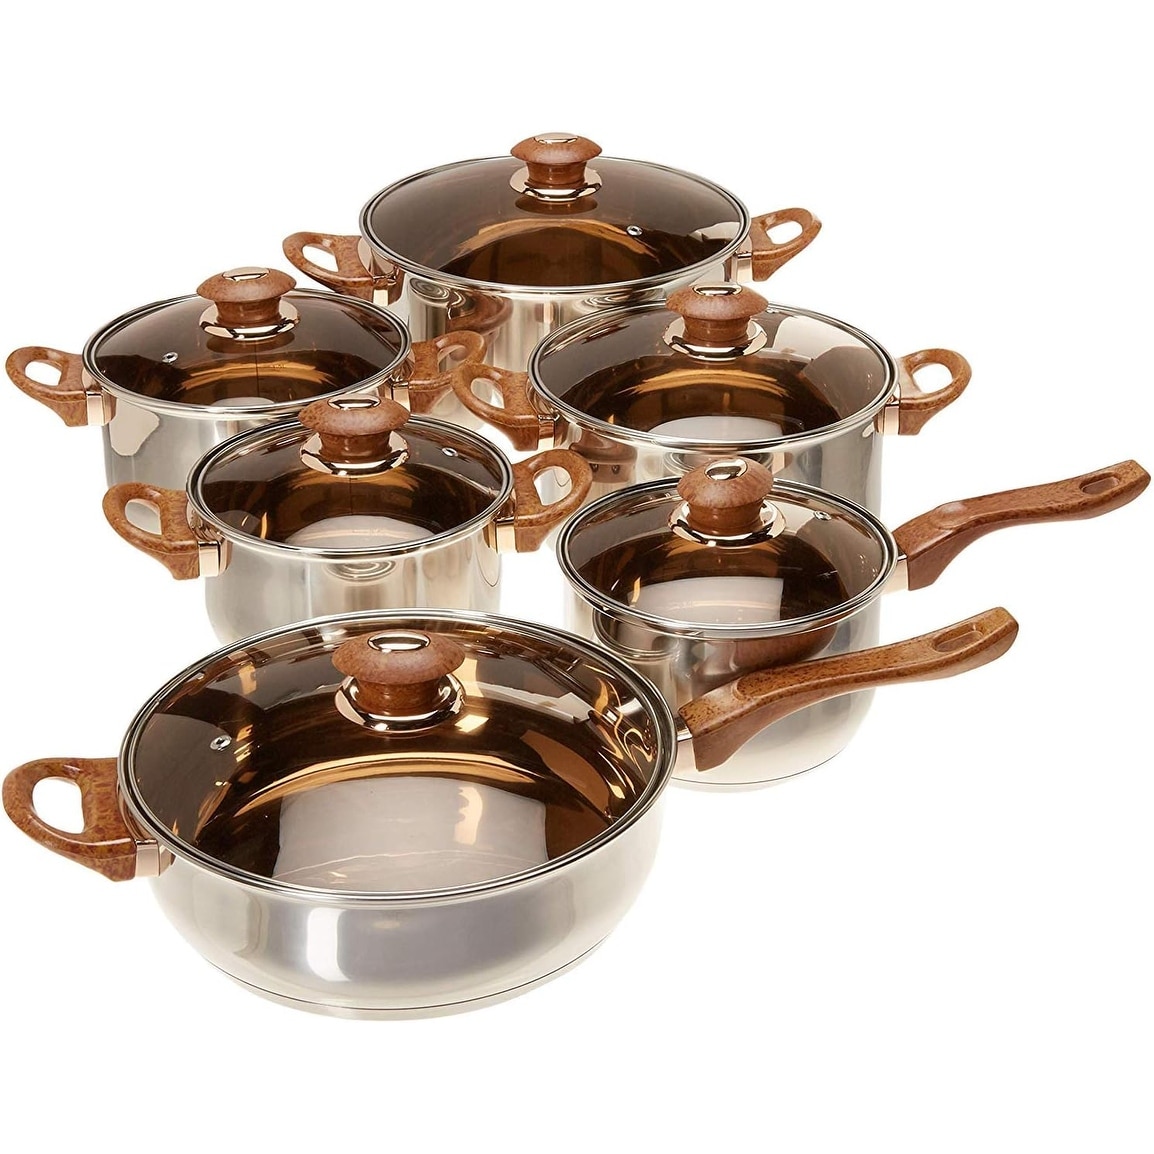 https://ak1.ostkcdn.com/images/products/is/images/direct/ec0ab406104390f28bdd9ec1e8c51f775d2f6985/12-Piece-Stainless-Steel-Cookware-Set.jpg